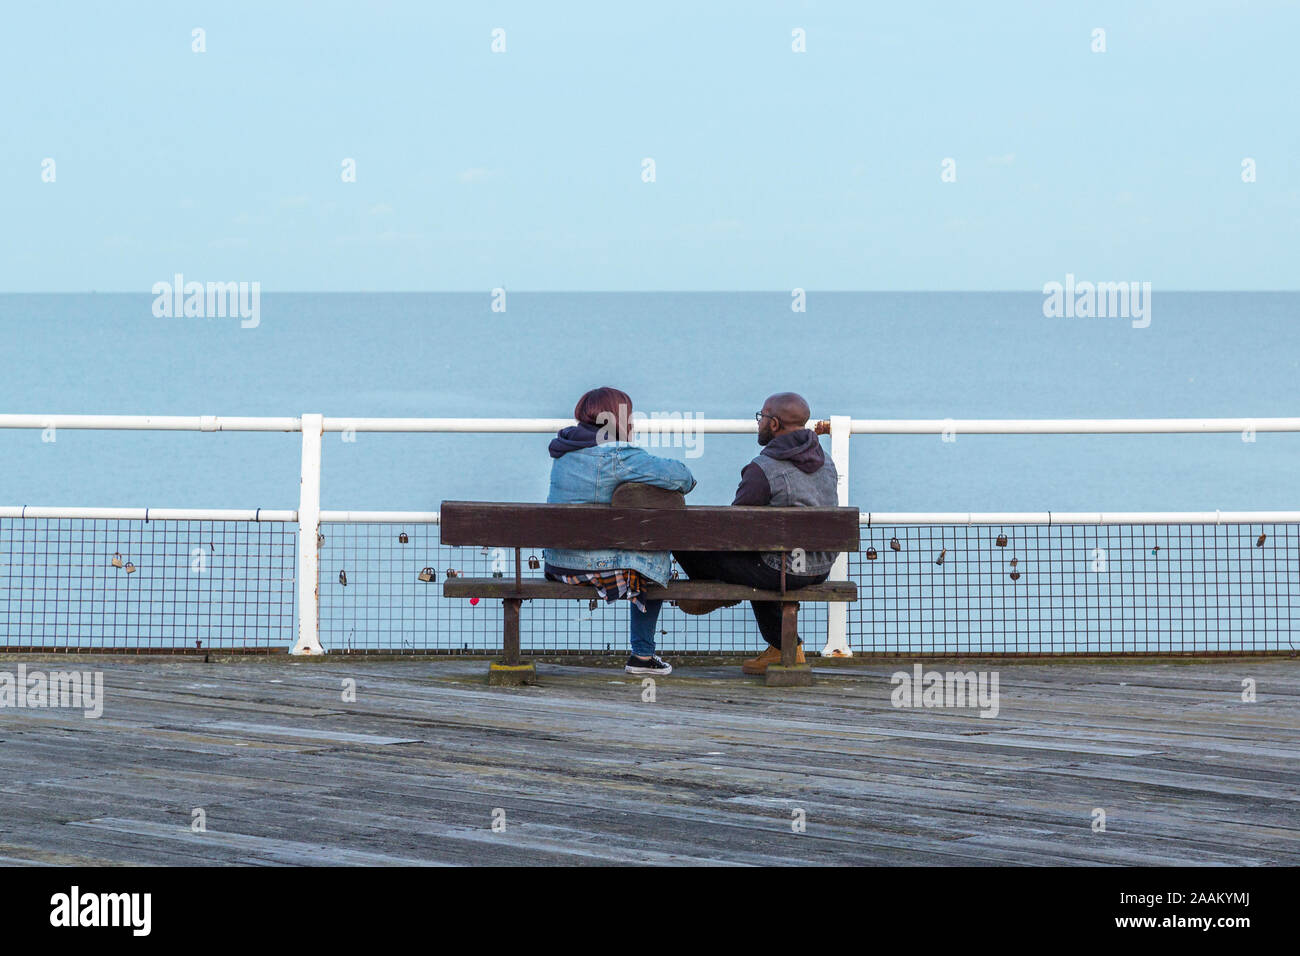 A man and woman sit talking on a bench while looking out to sea. Love locks are attached to the railing in front of them. Stock Photo